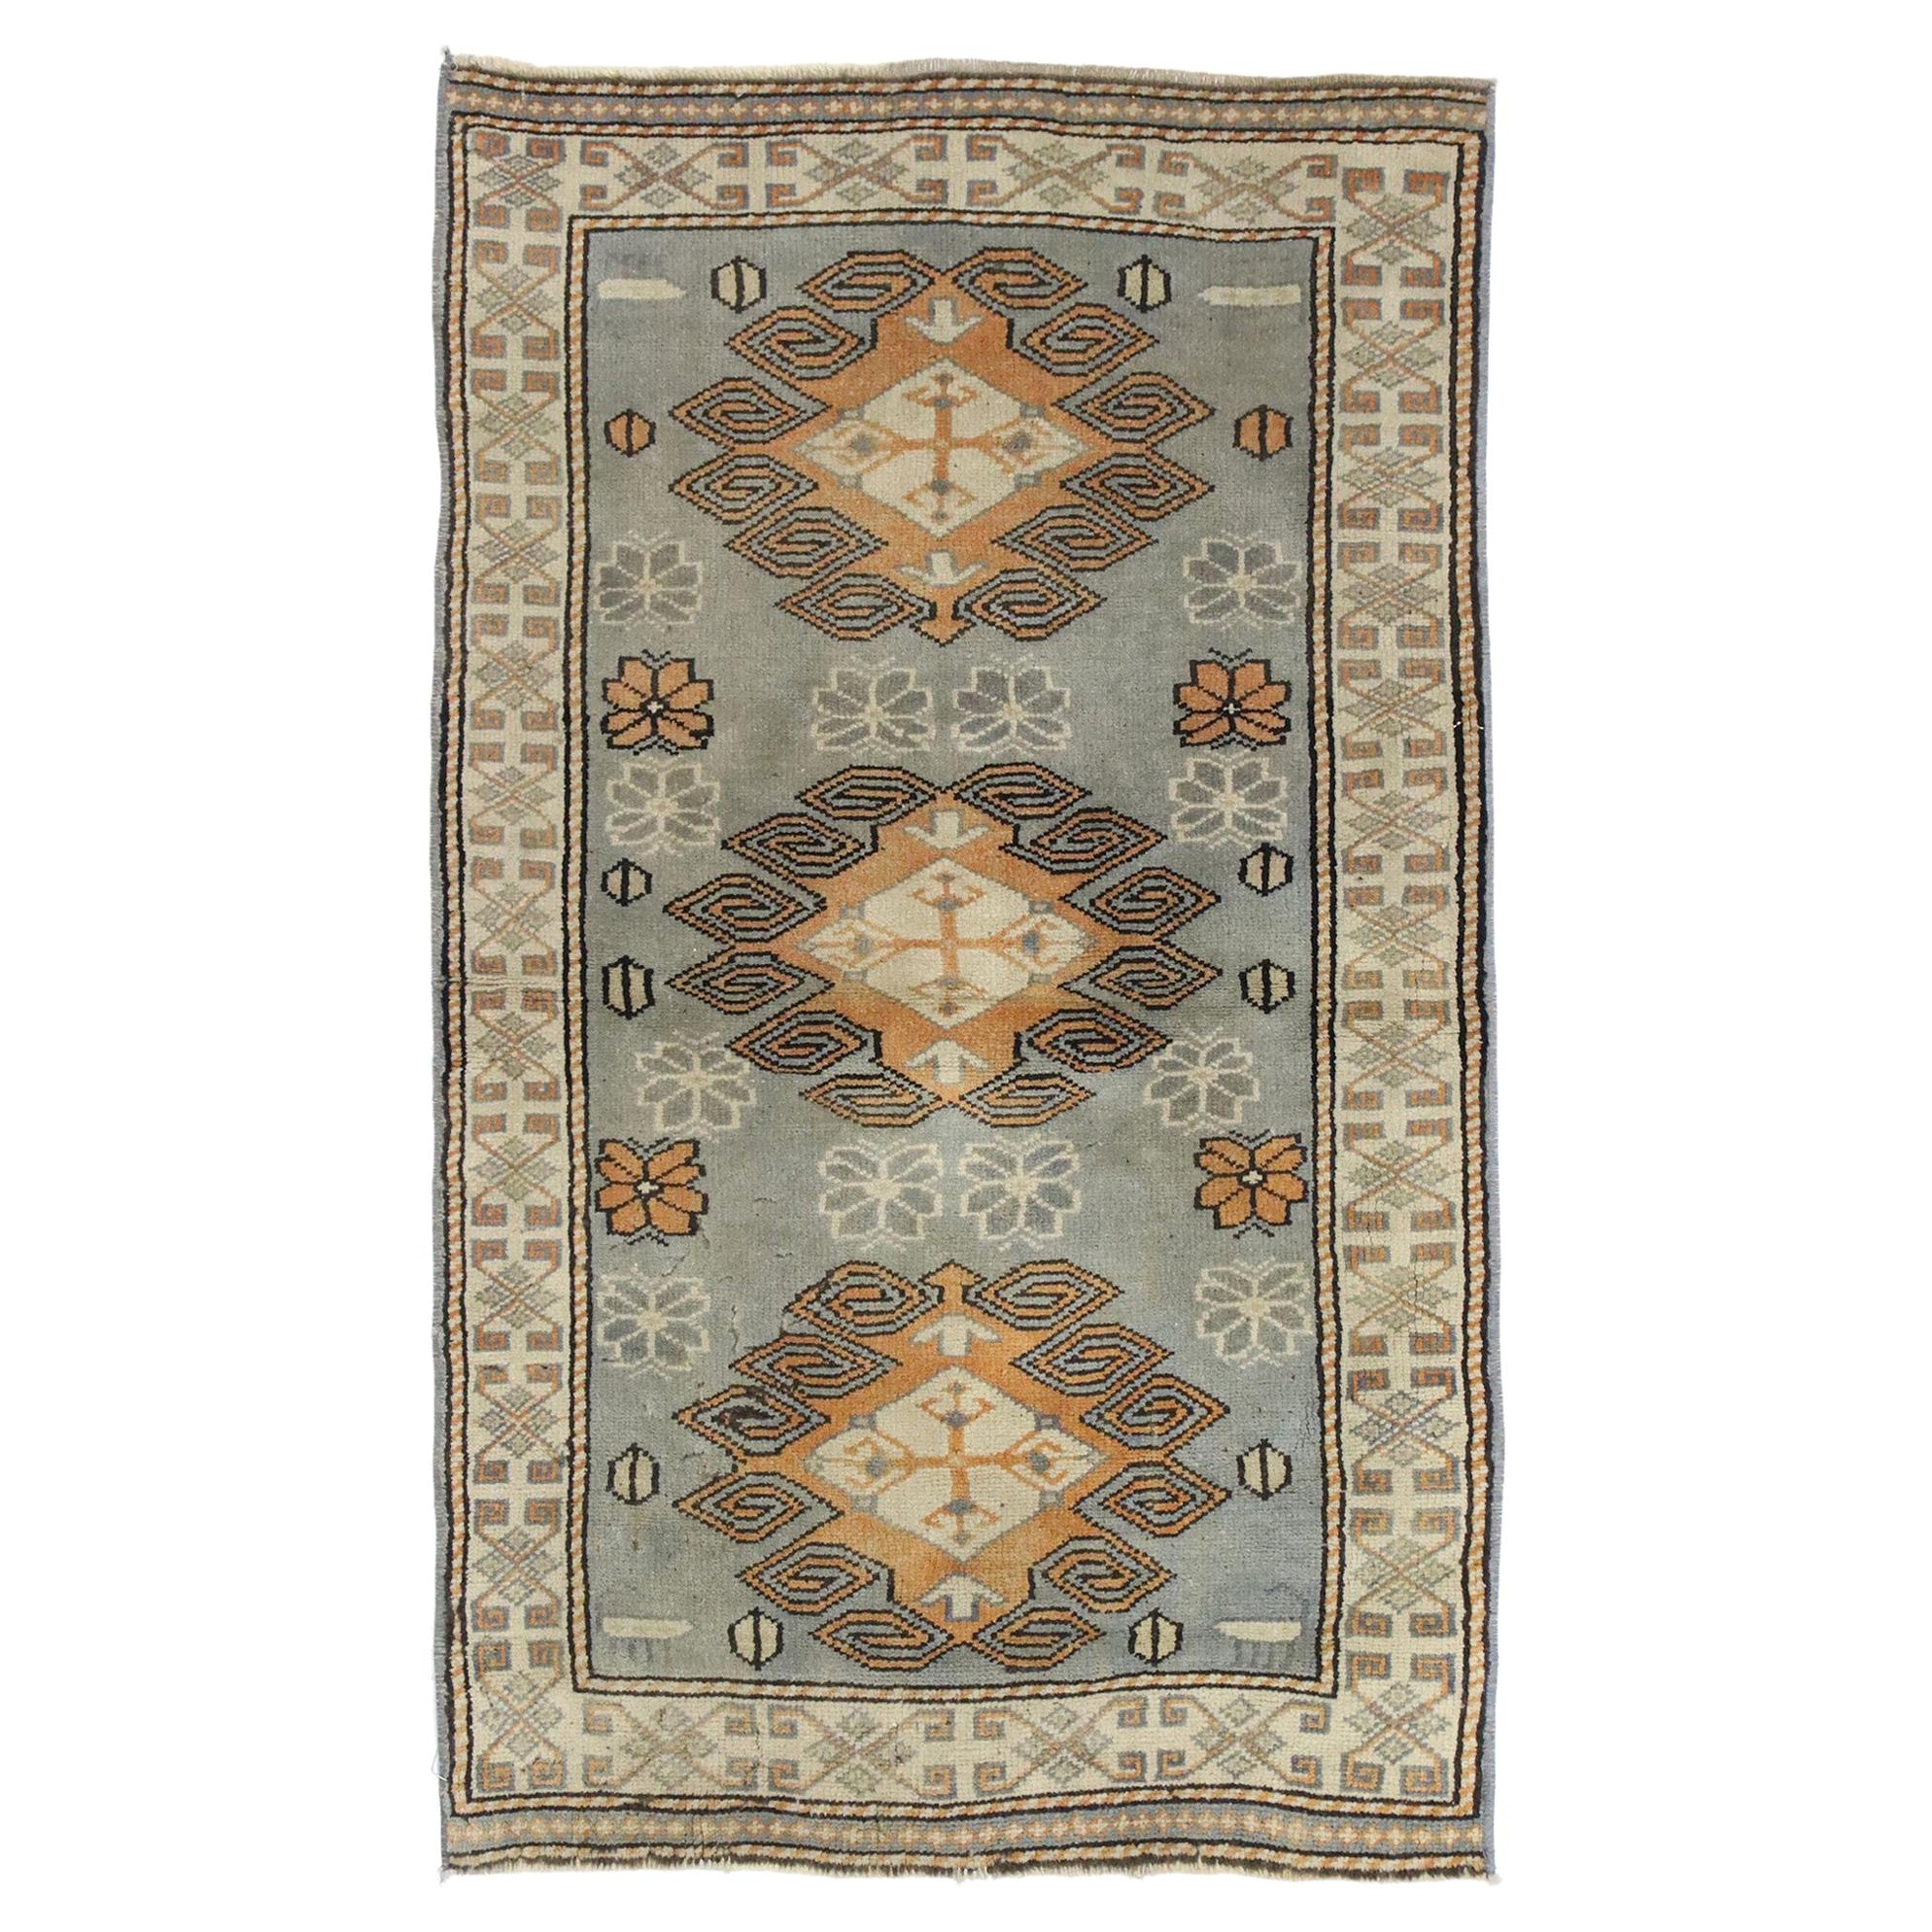 Vintage Turkish Oushak Rug with Artisan Belgian Style and Soft Colors